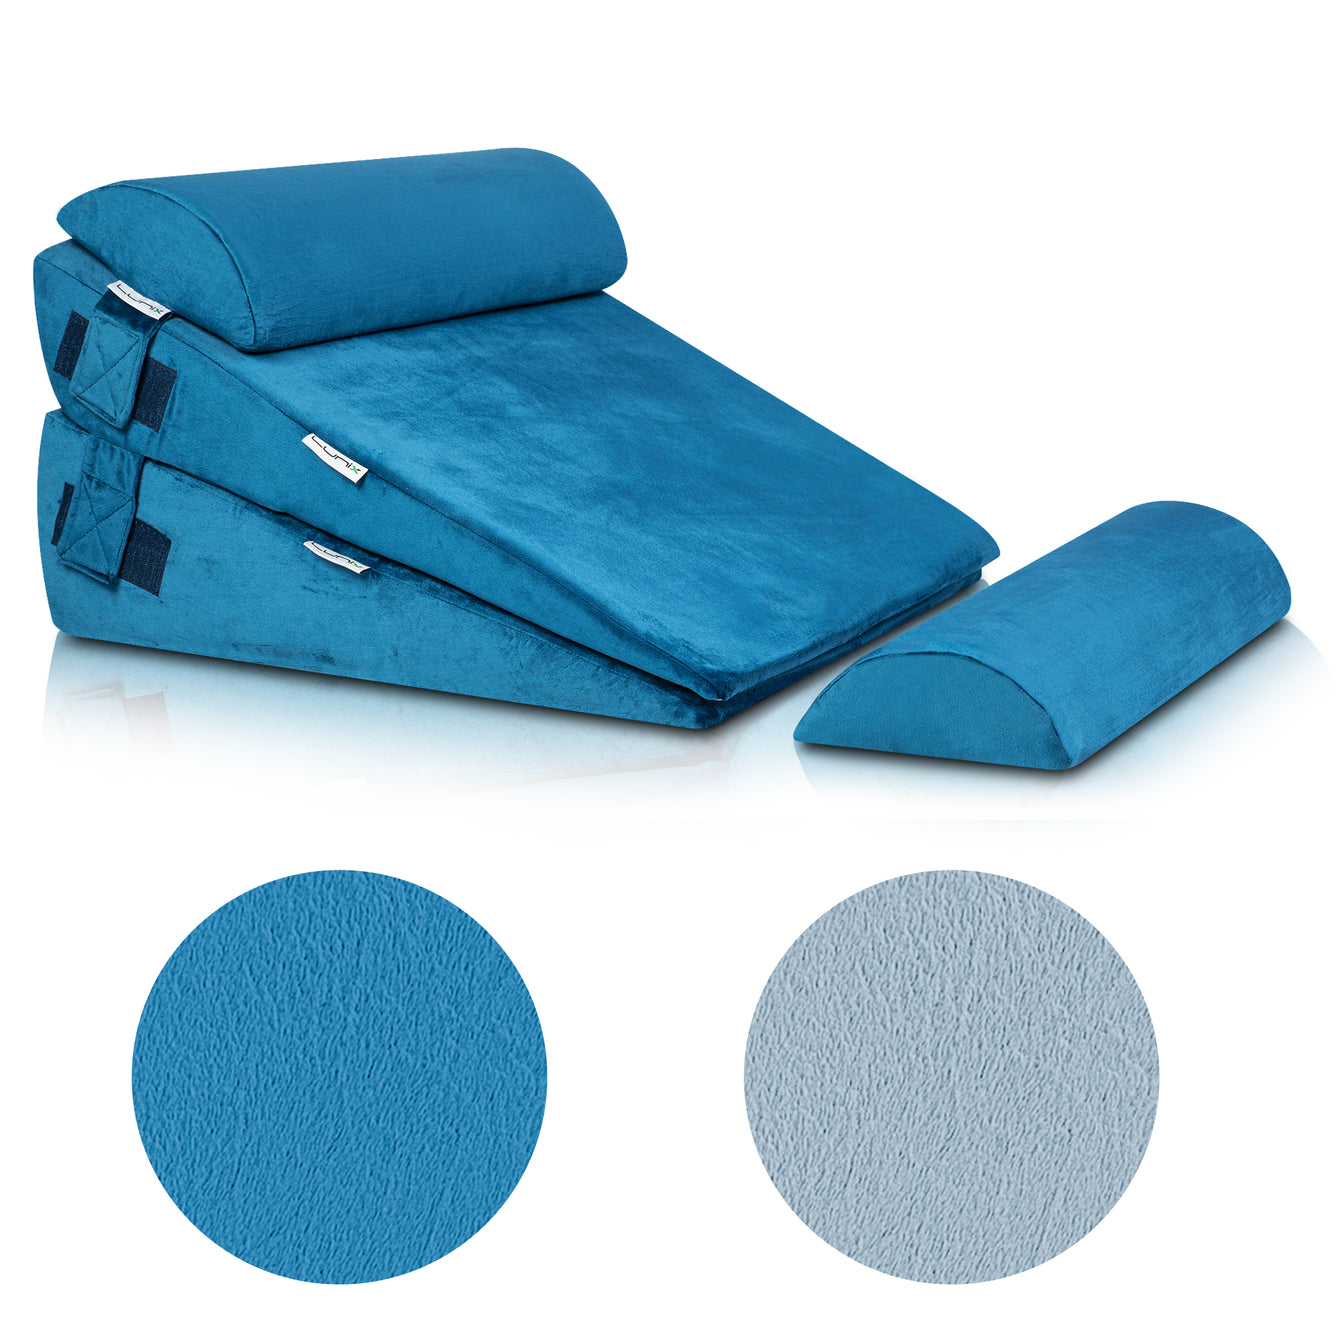 Lunix Replacement Cover for LX8 2 Layers Wedge Pillow Set, Foam not Included - Blue